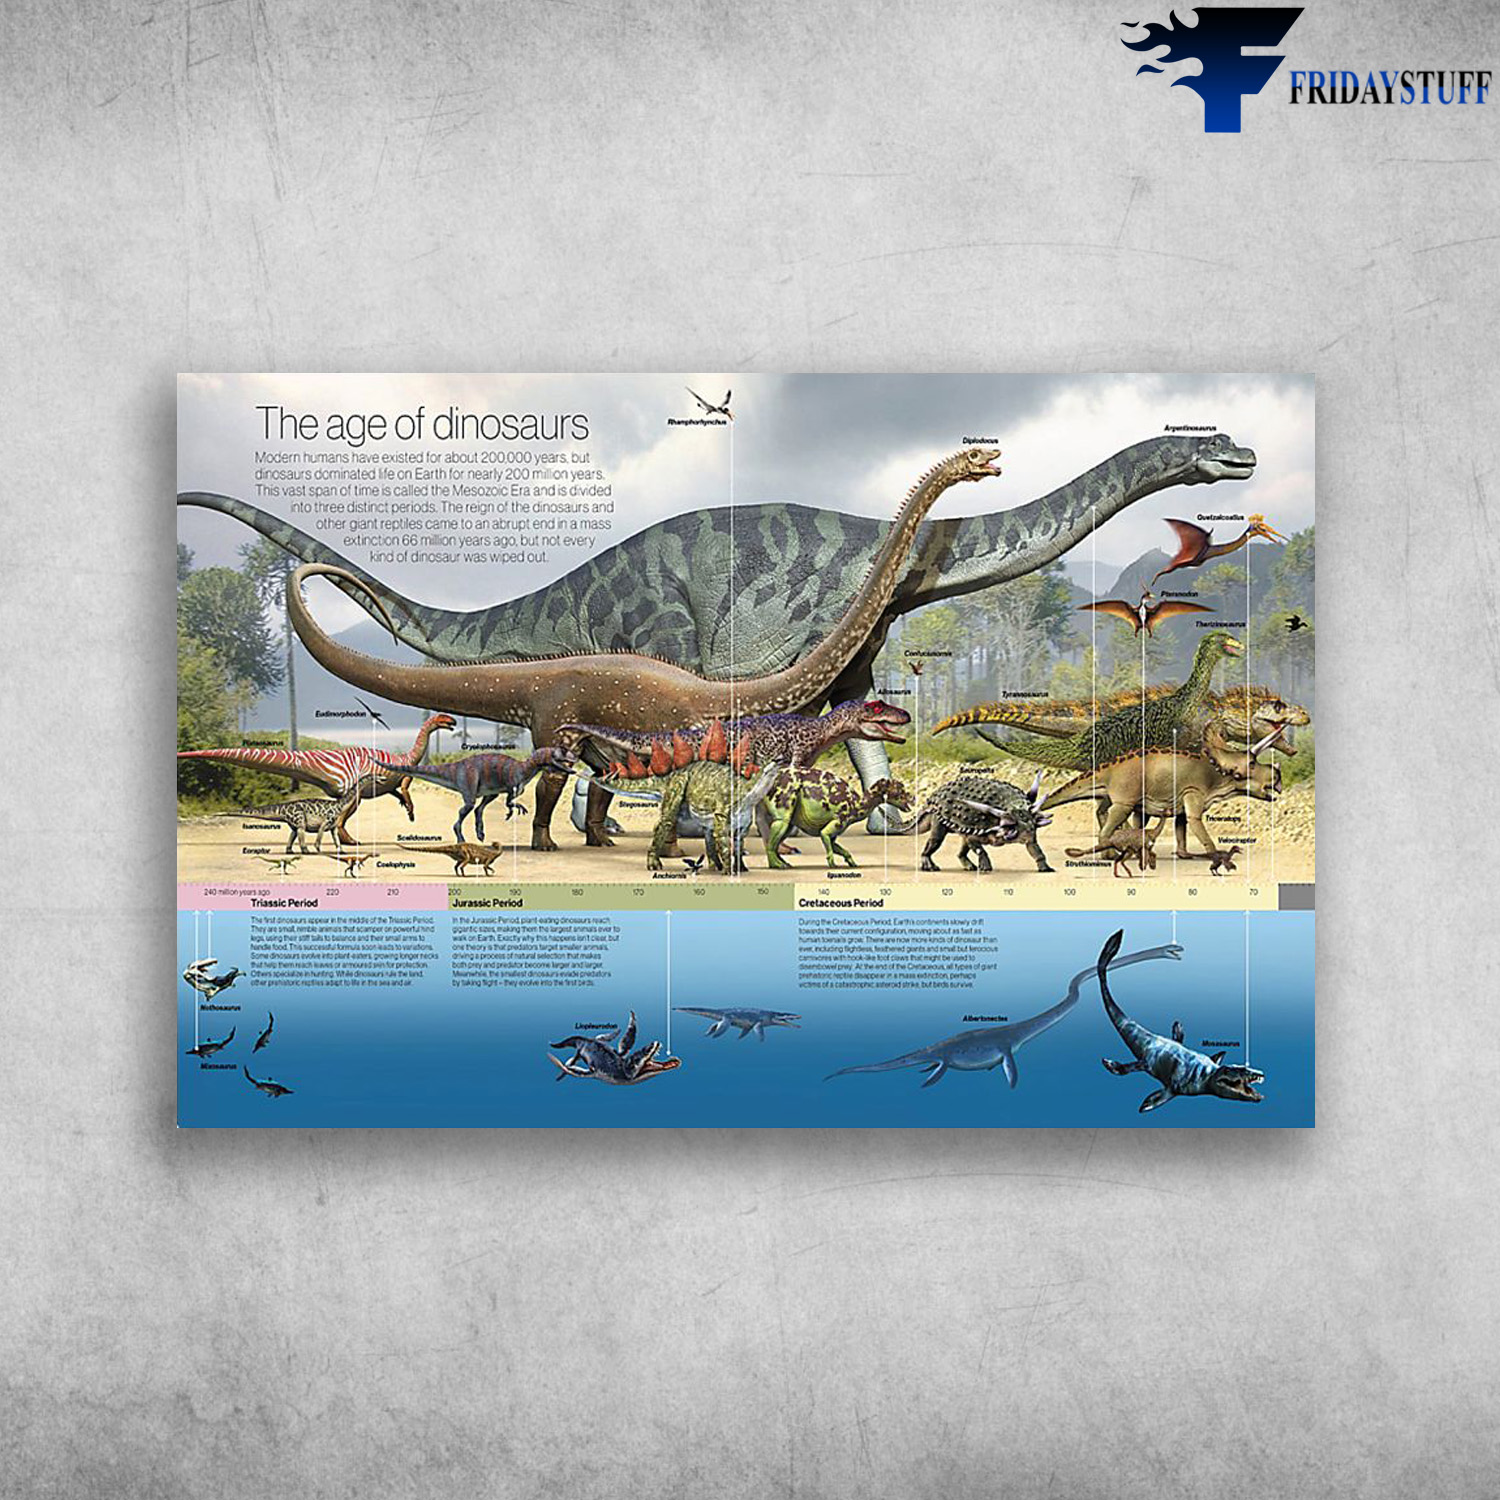 Dinosaurs Knowledge - The Age Of Dinosaurs, Triassic Period, Jurassic Period, Cretaceous Period, Types Of Dinosaurs